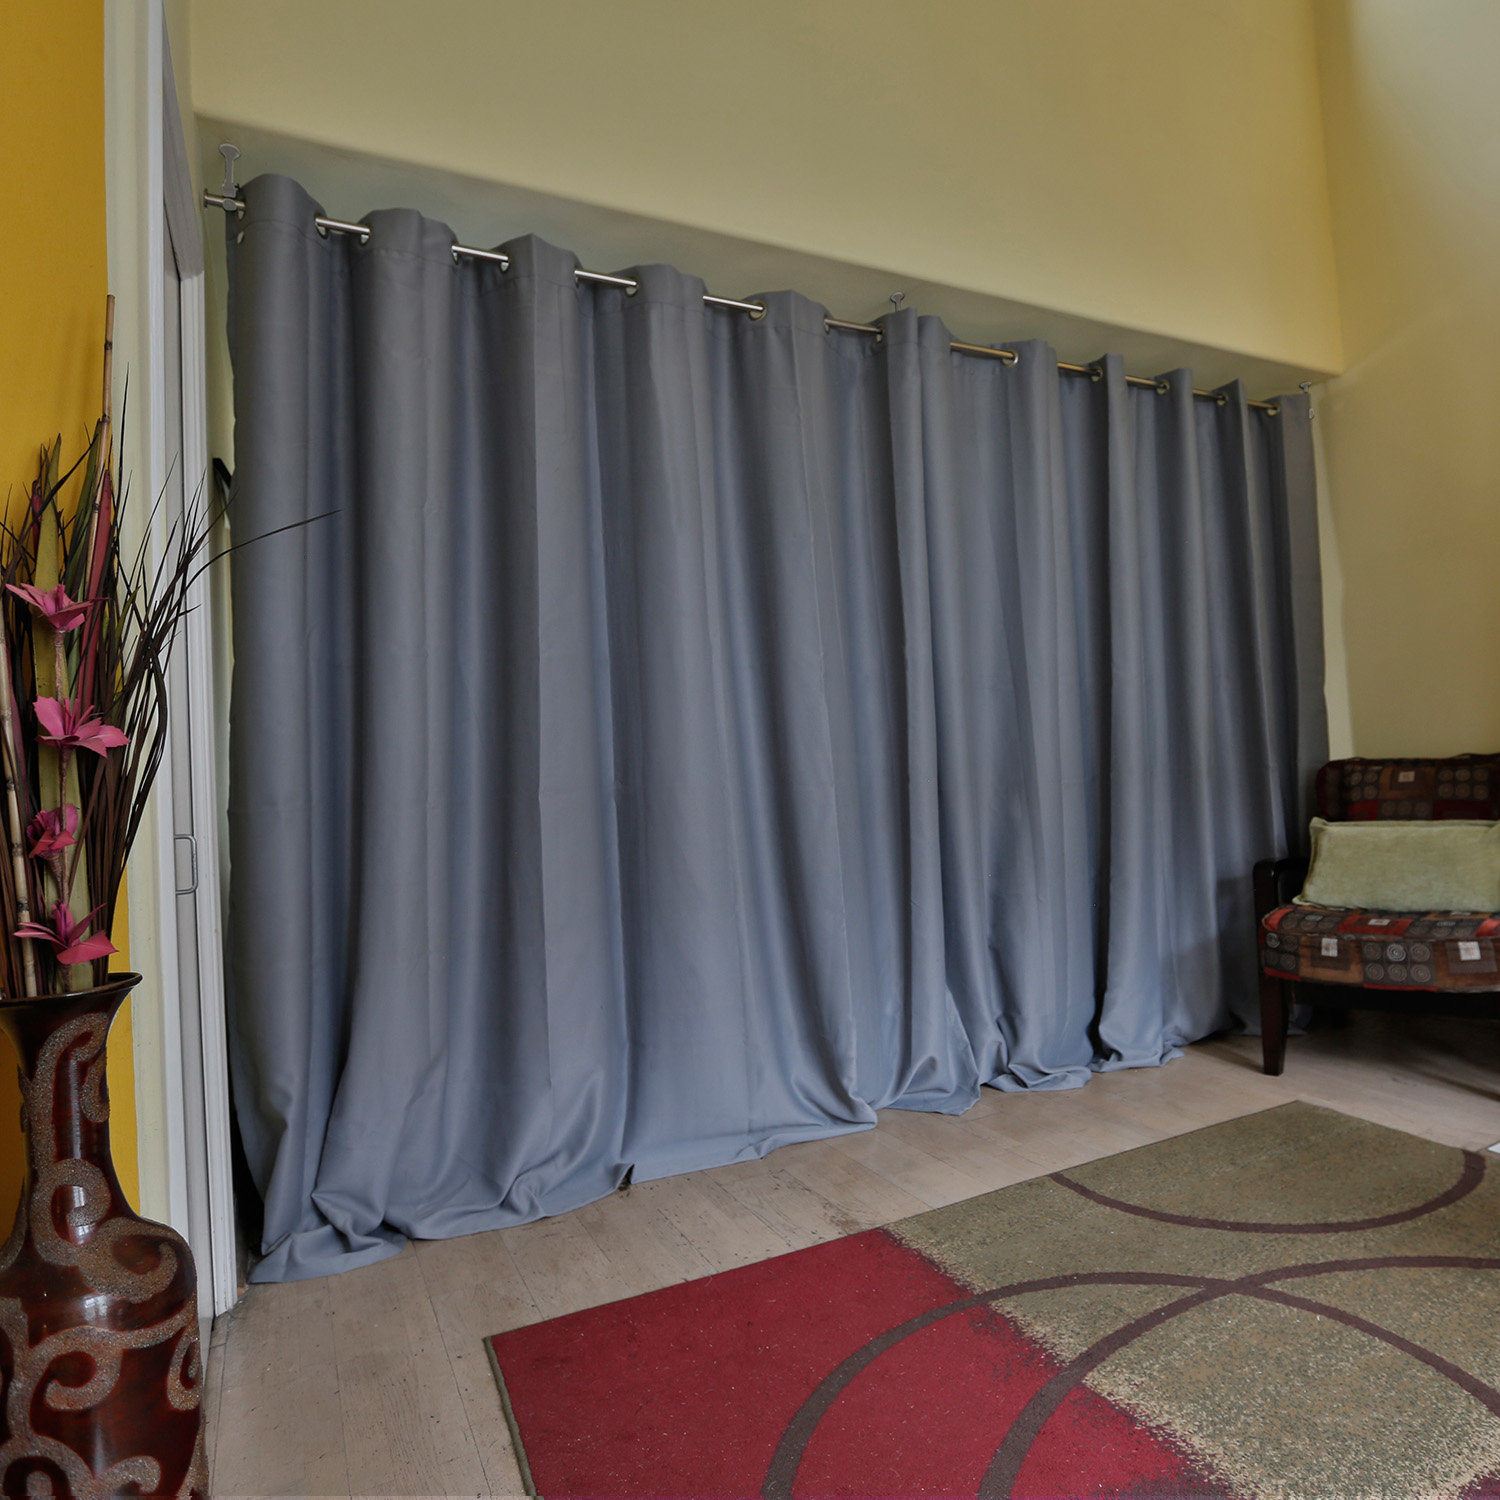 hanging room divider curtains photo - 9